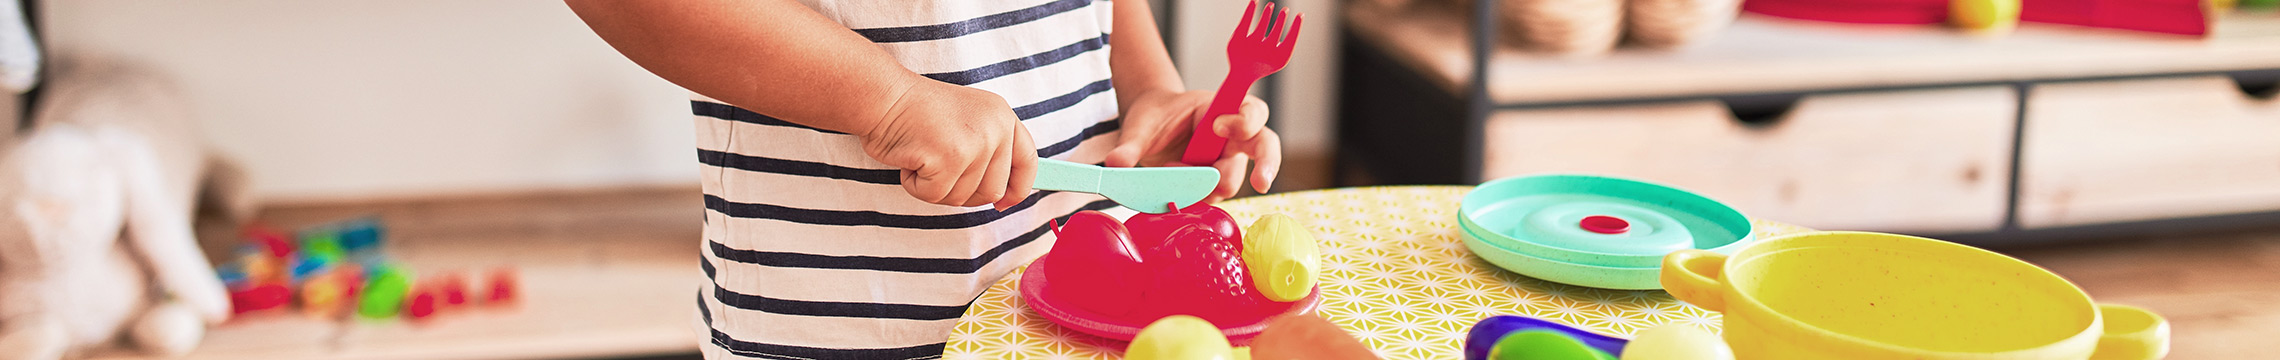 Little boy prepares a brightly colored meal with a play set of food